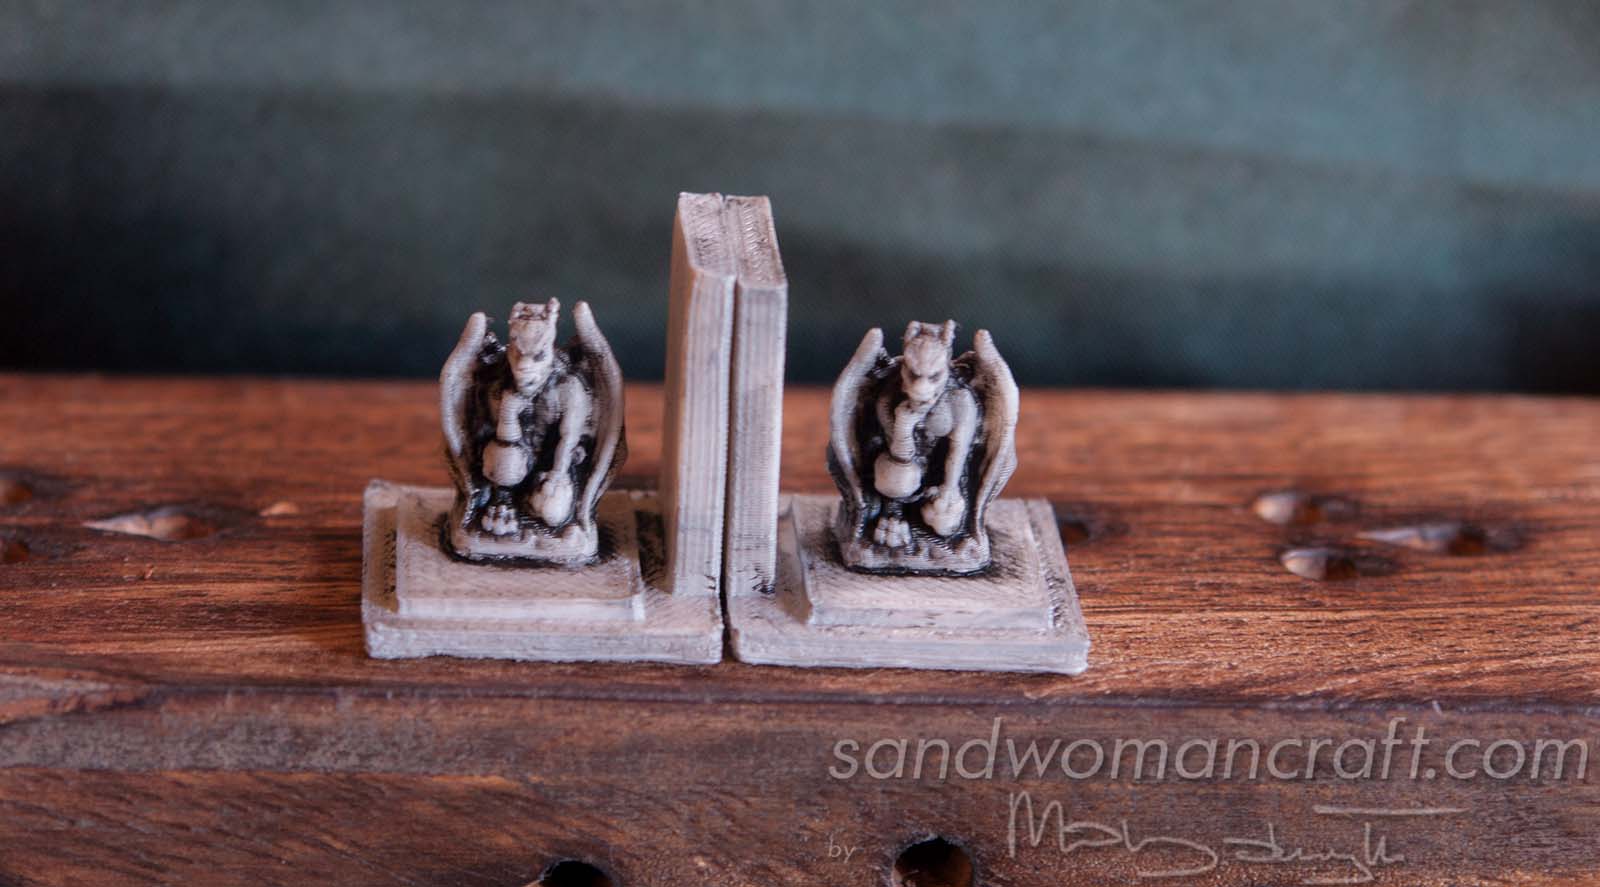 Miniature bookends with Gargoyles in 1:12 scale, 1 inch scale